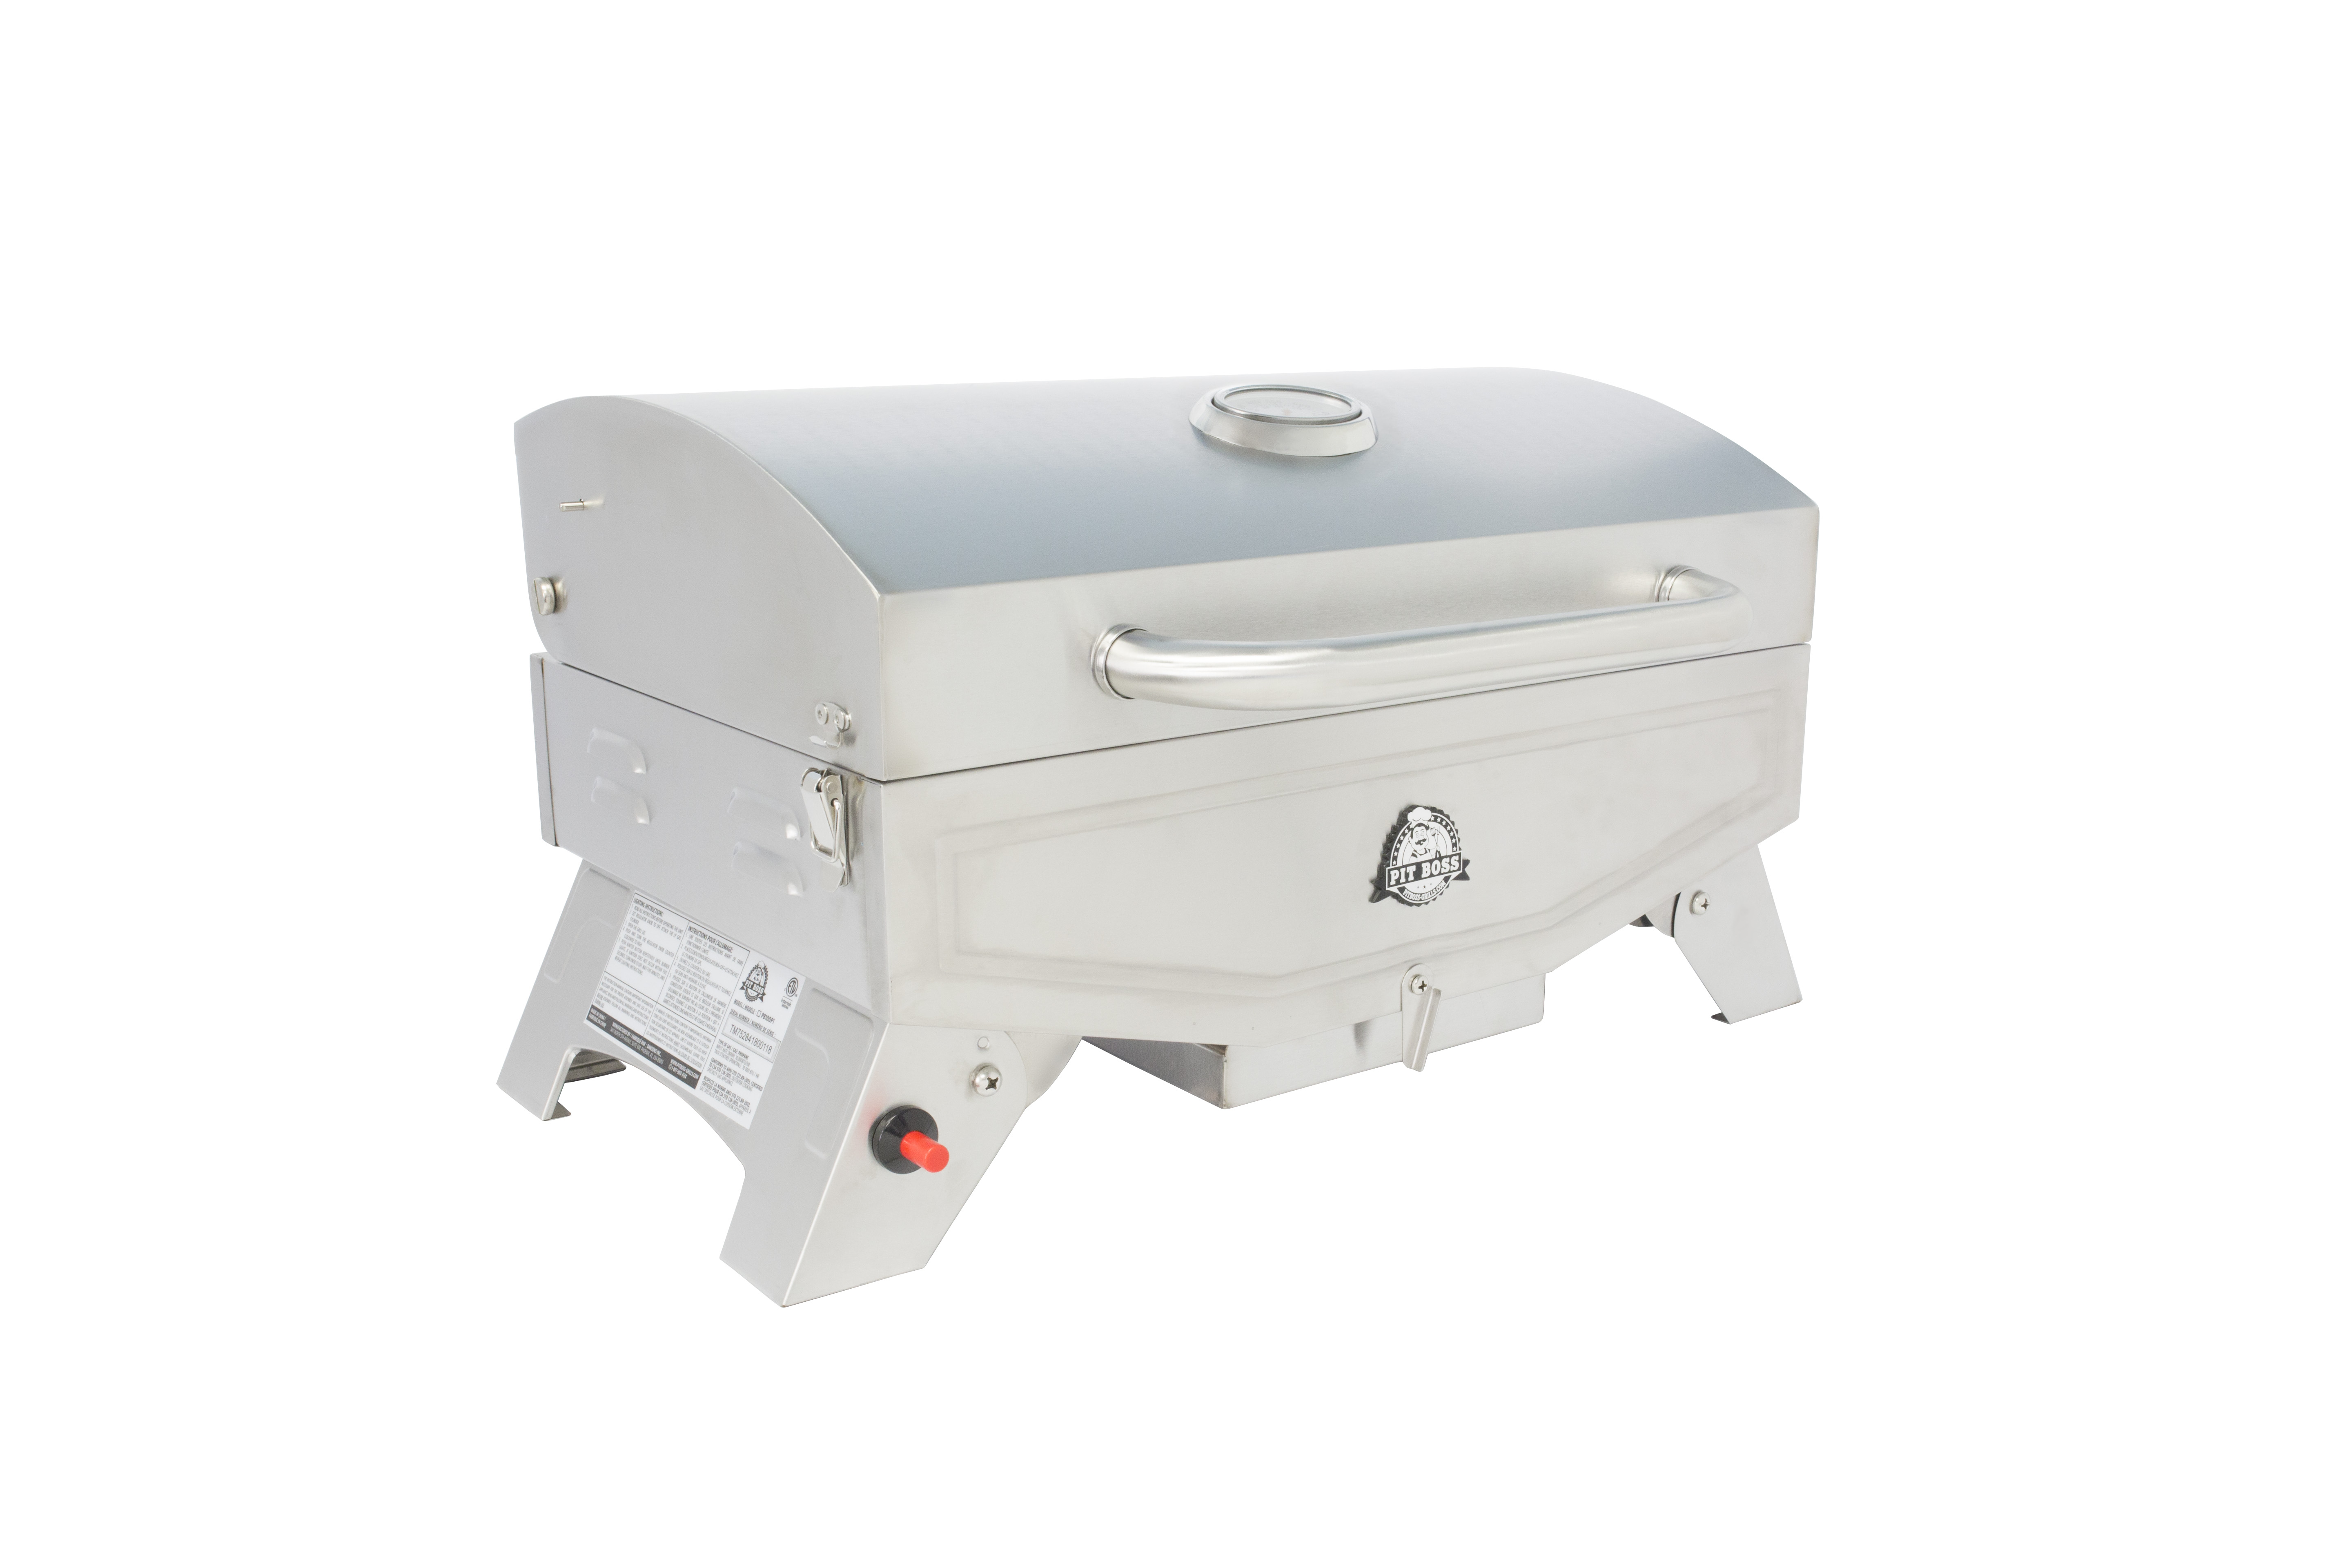 Pit Boss Single-Burner Portable Gas Grill - image 4 of 8